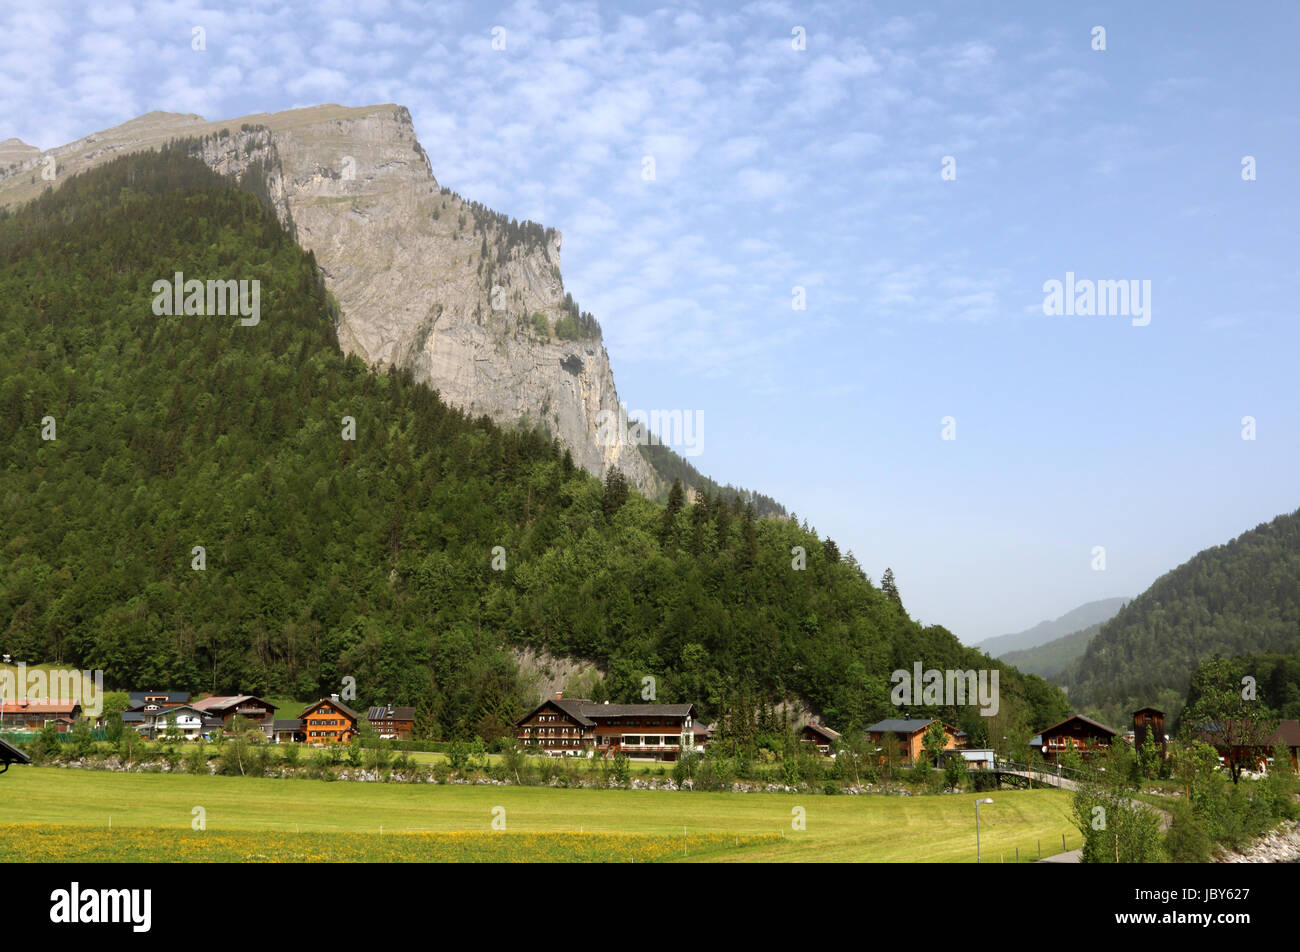 Auer Zunft High Resolution Stock Photography and Images - Alamy